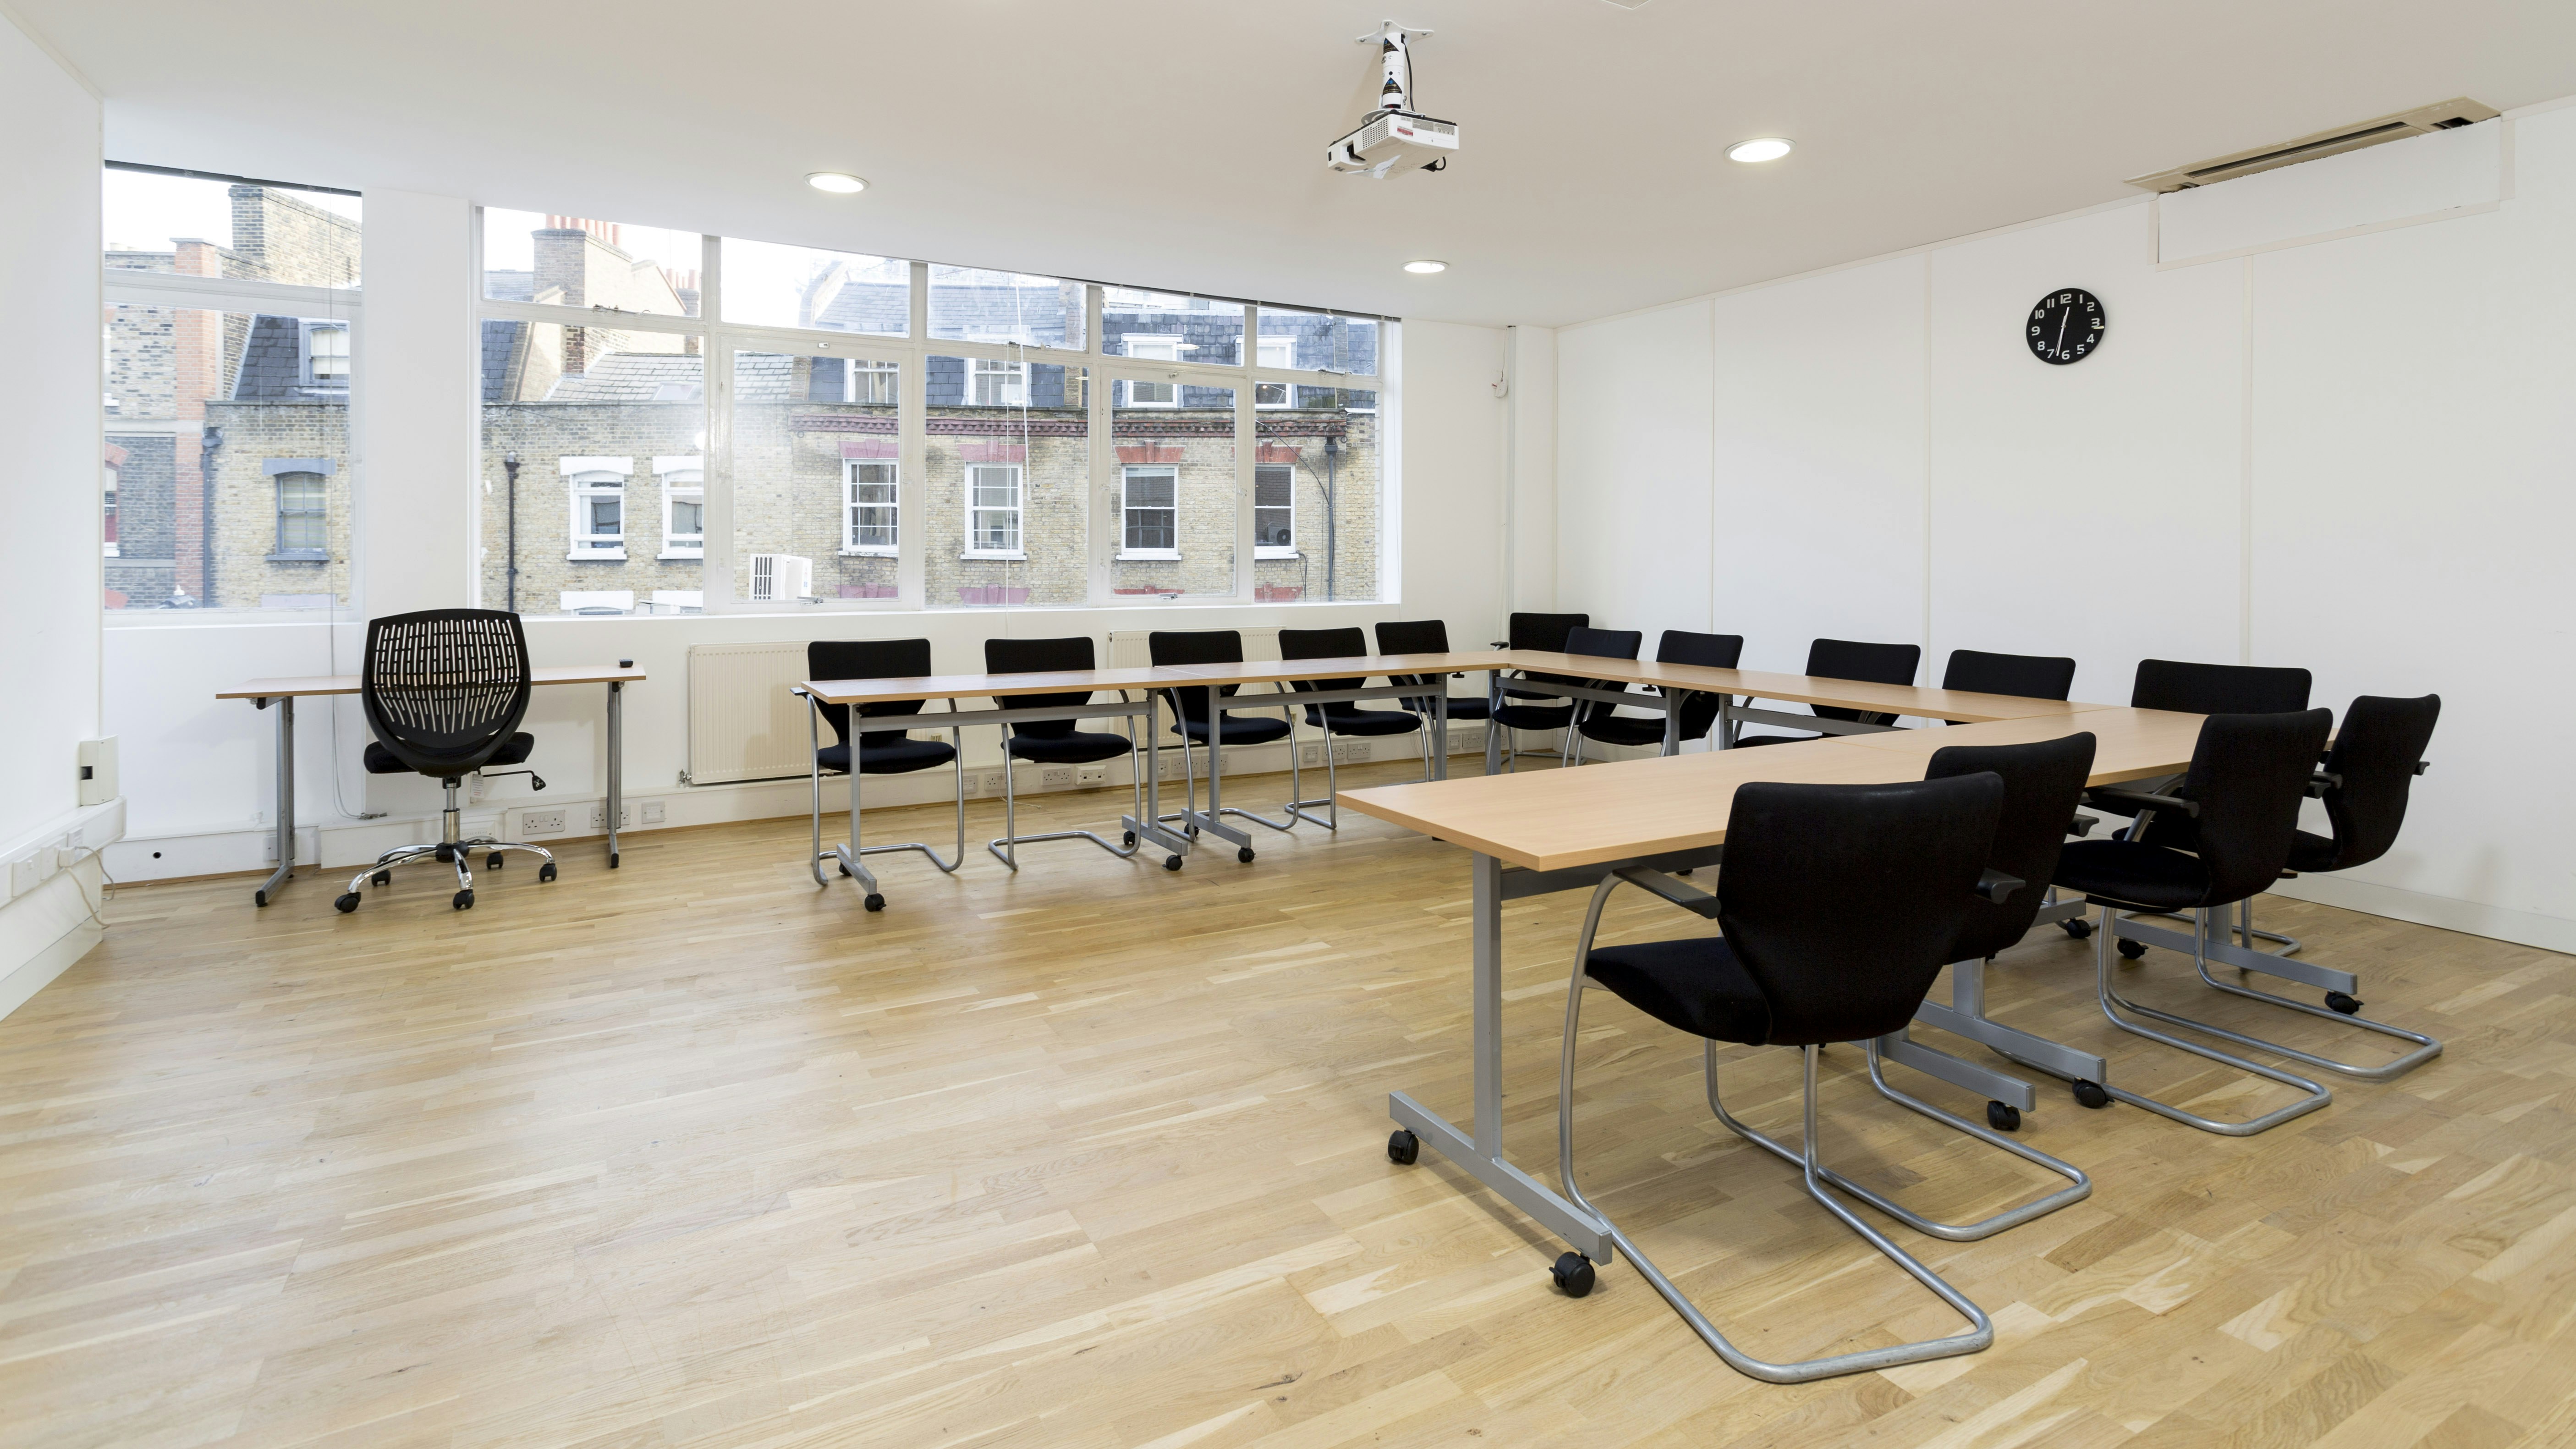 Cheap Meeting Rooms Venues in London - The Training Room Hire Company